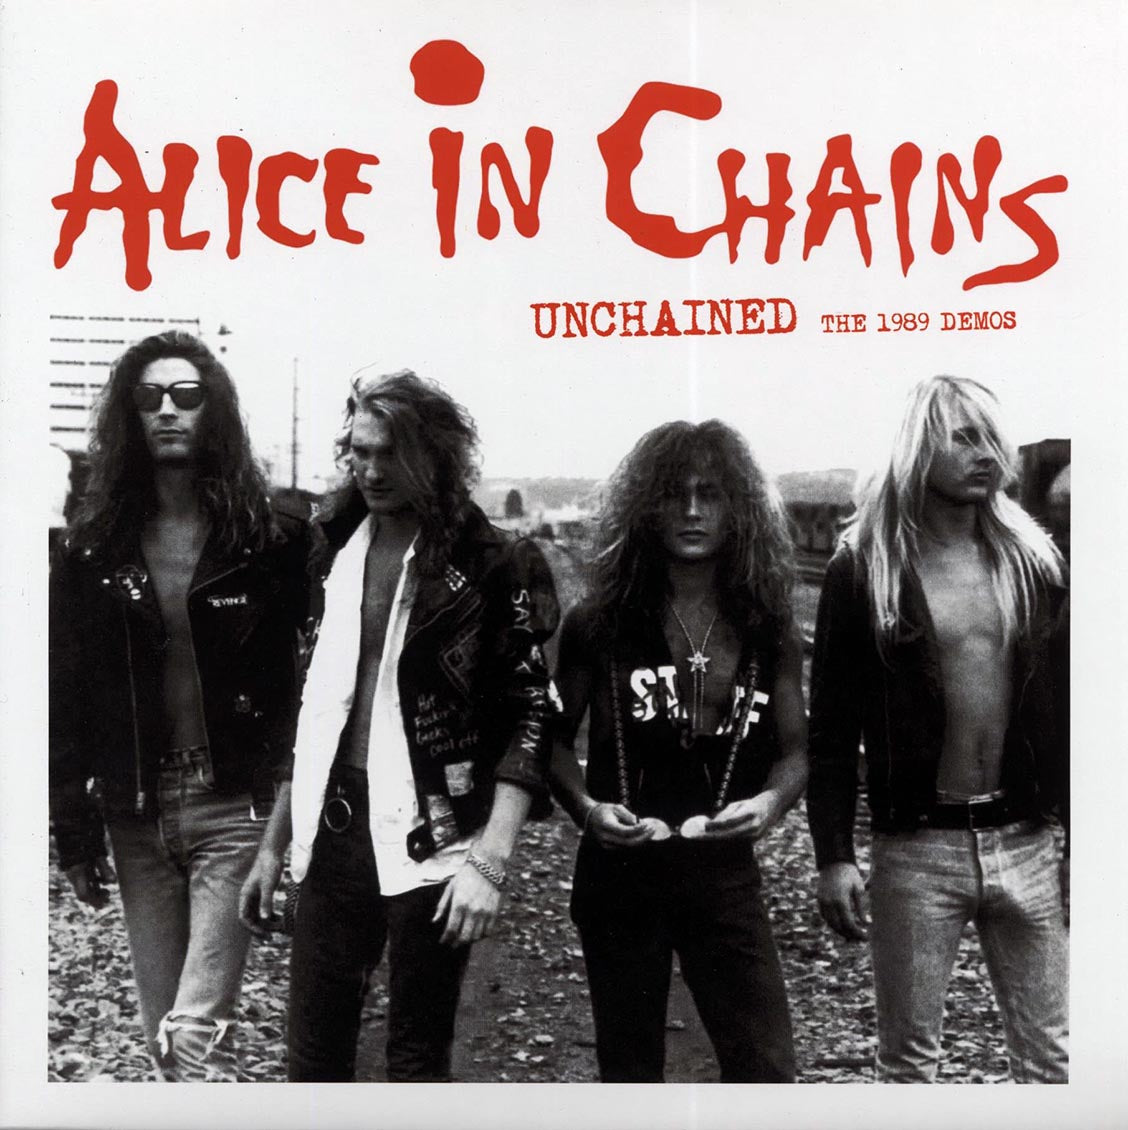 Alice In Chains - Unchained: The 1989 Demos (Facelift Demos) - Vinyl LP